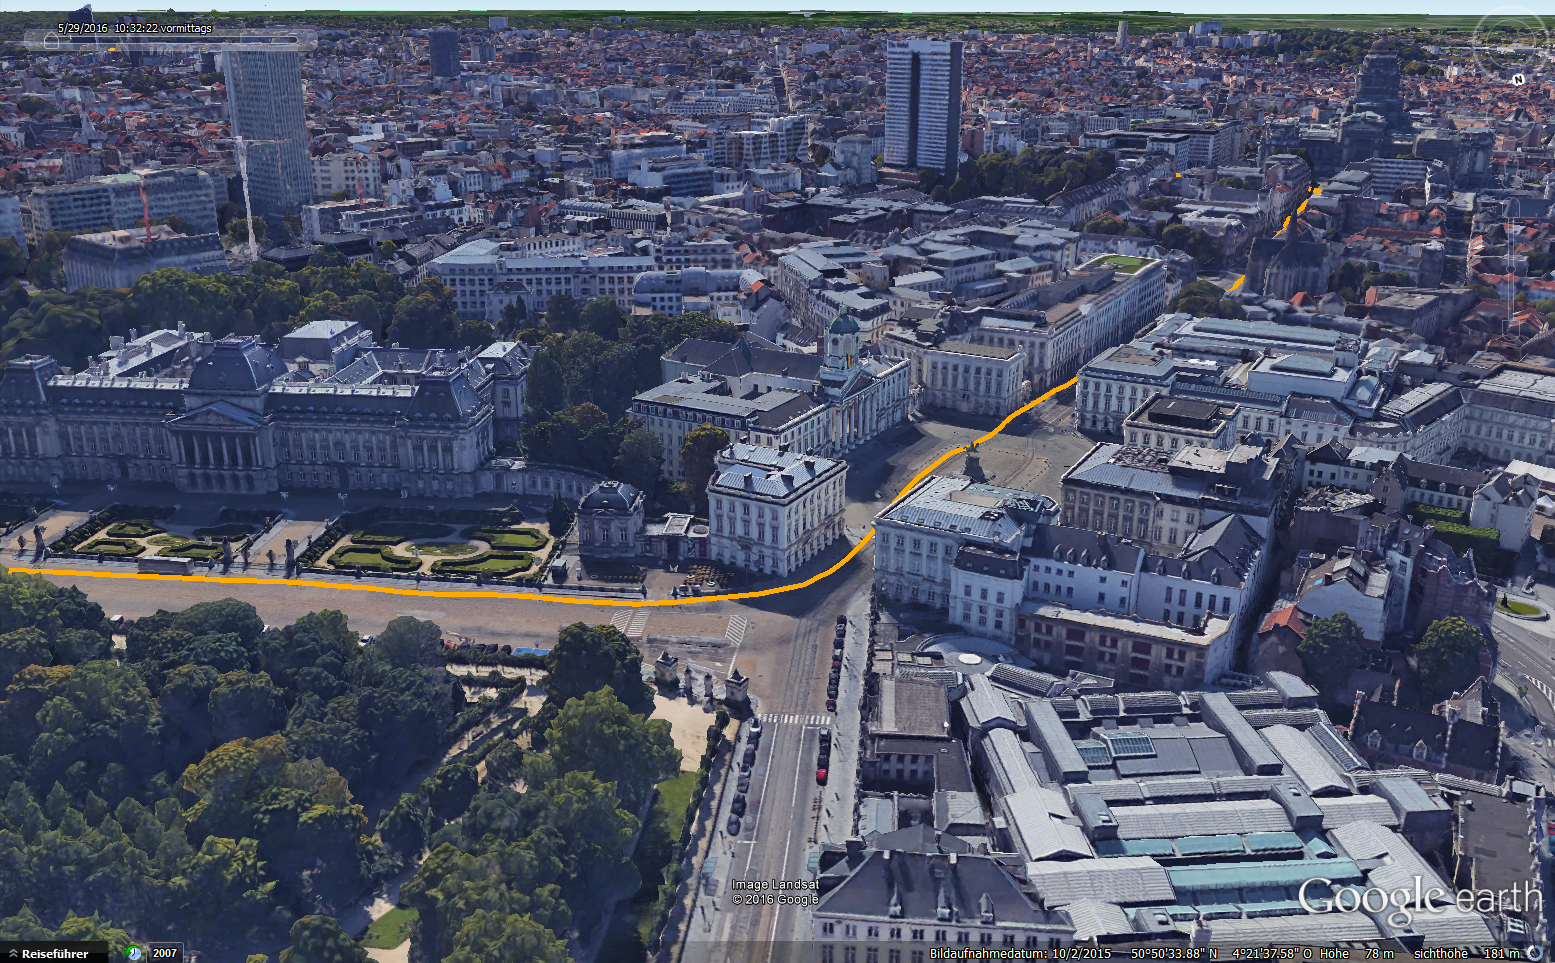 Royal Palace of Brussels on the left and the Palace of Justice at the top right corner